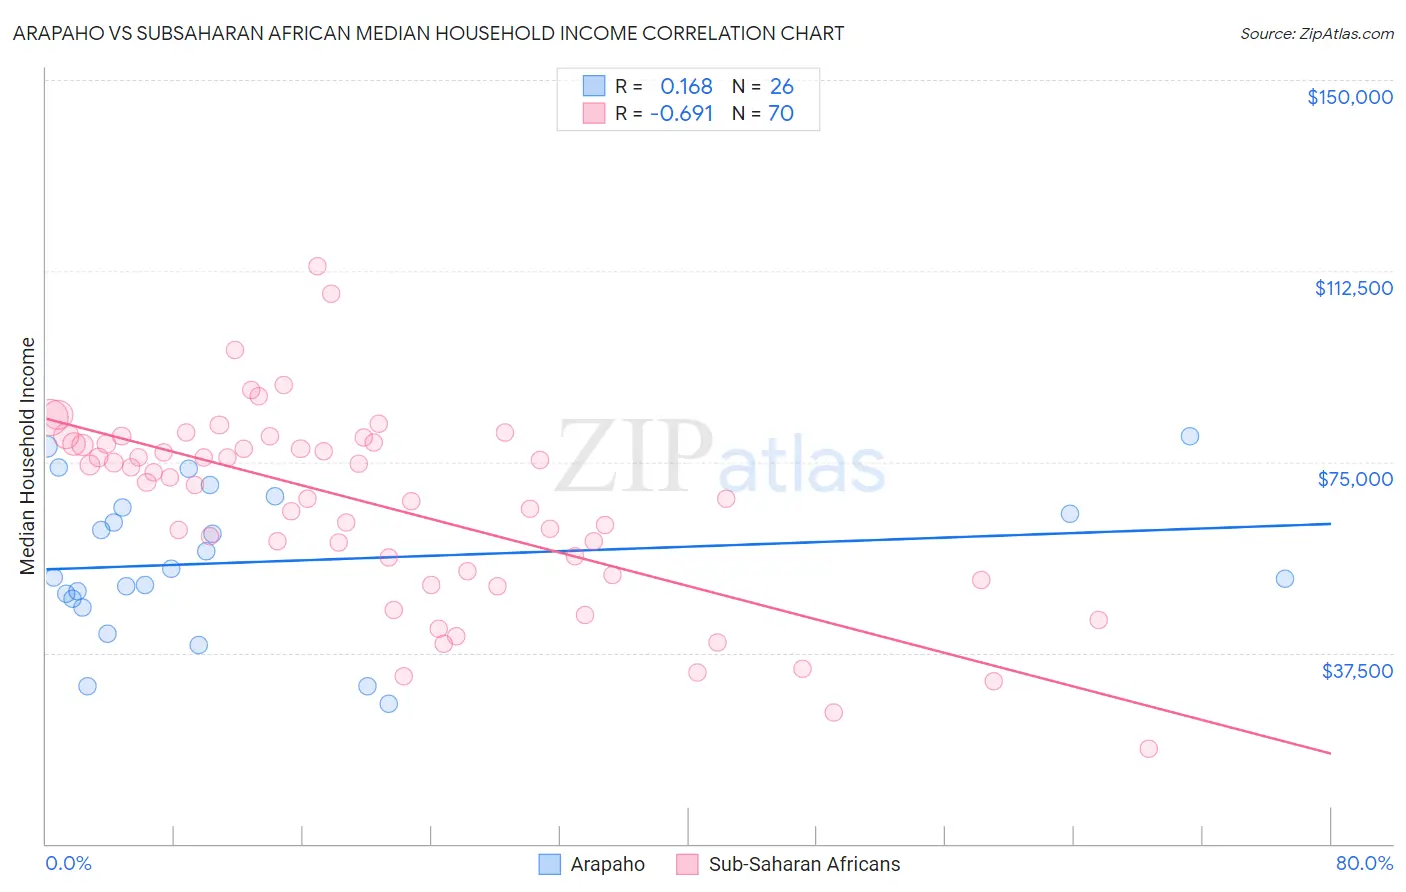 Arapaho vs Subsaharan African Median Household Income